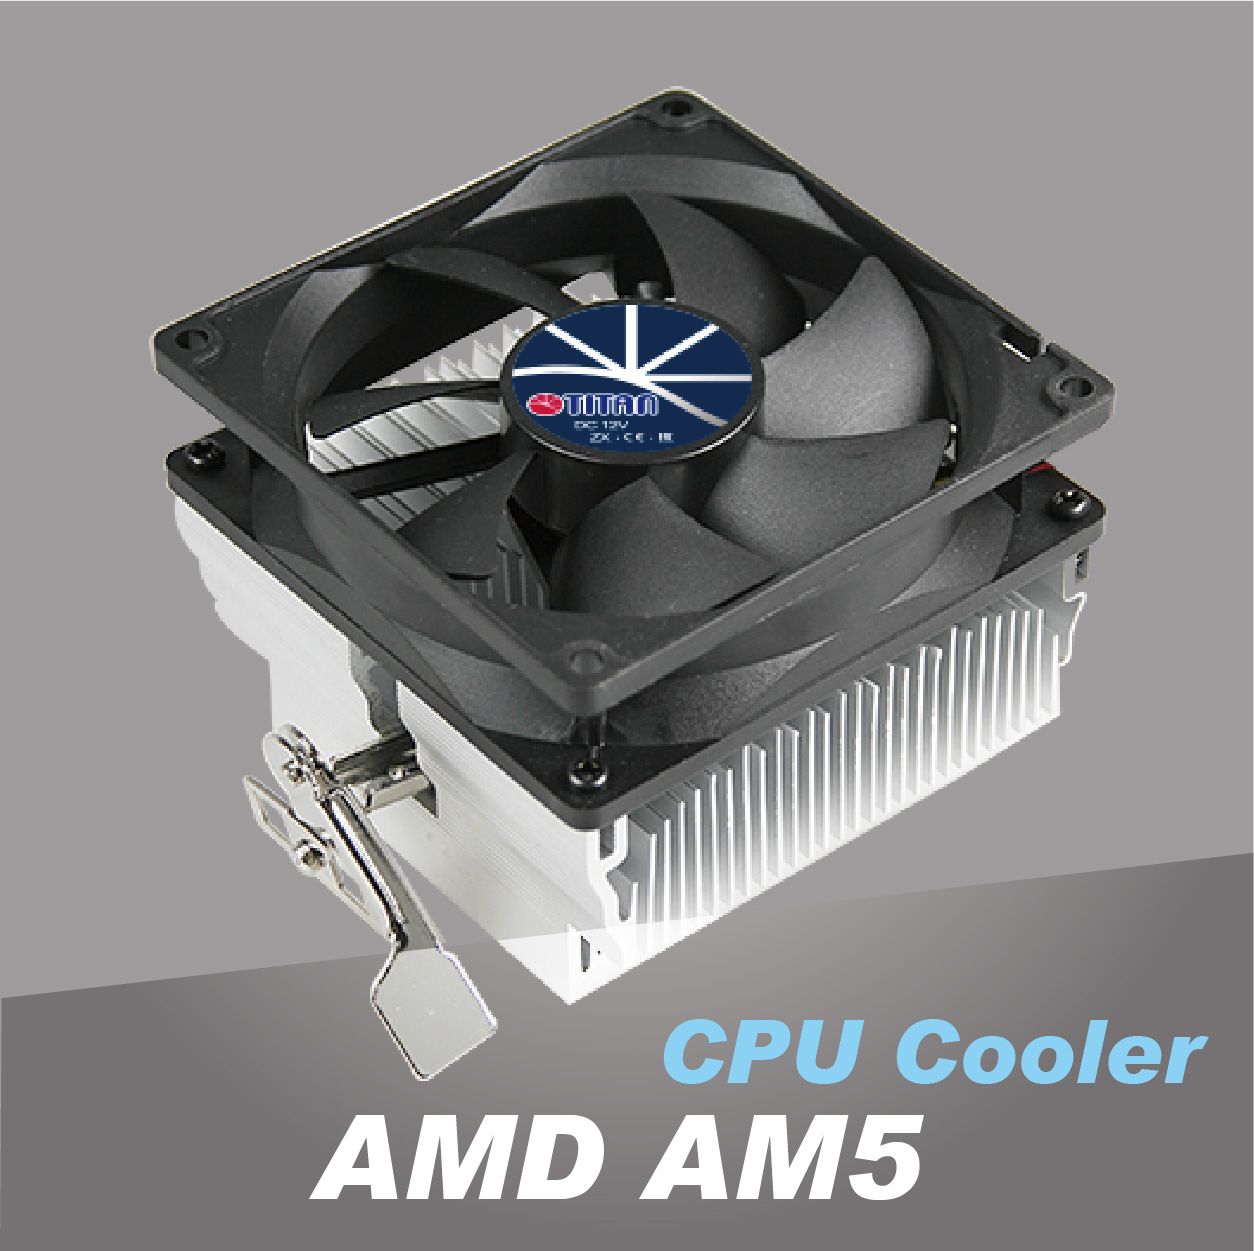 Aluminum fins and silent cooling fan design ensures incredible cooler cooling performance.